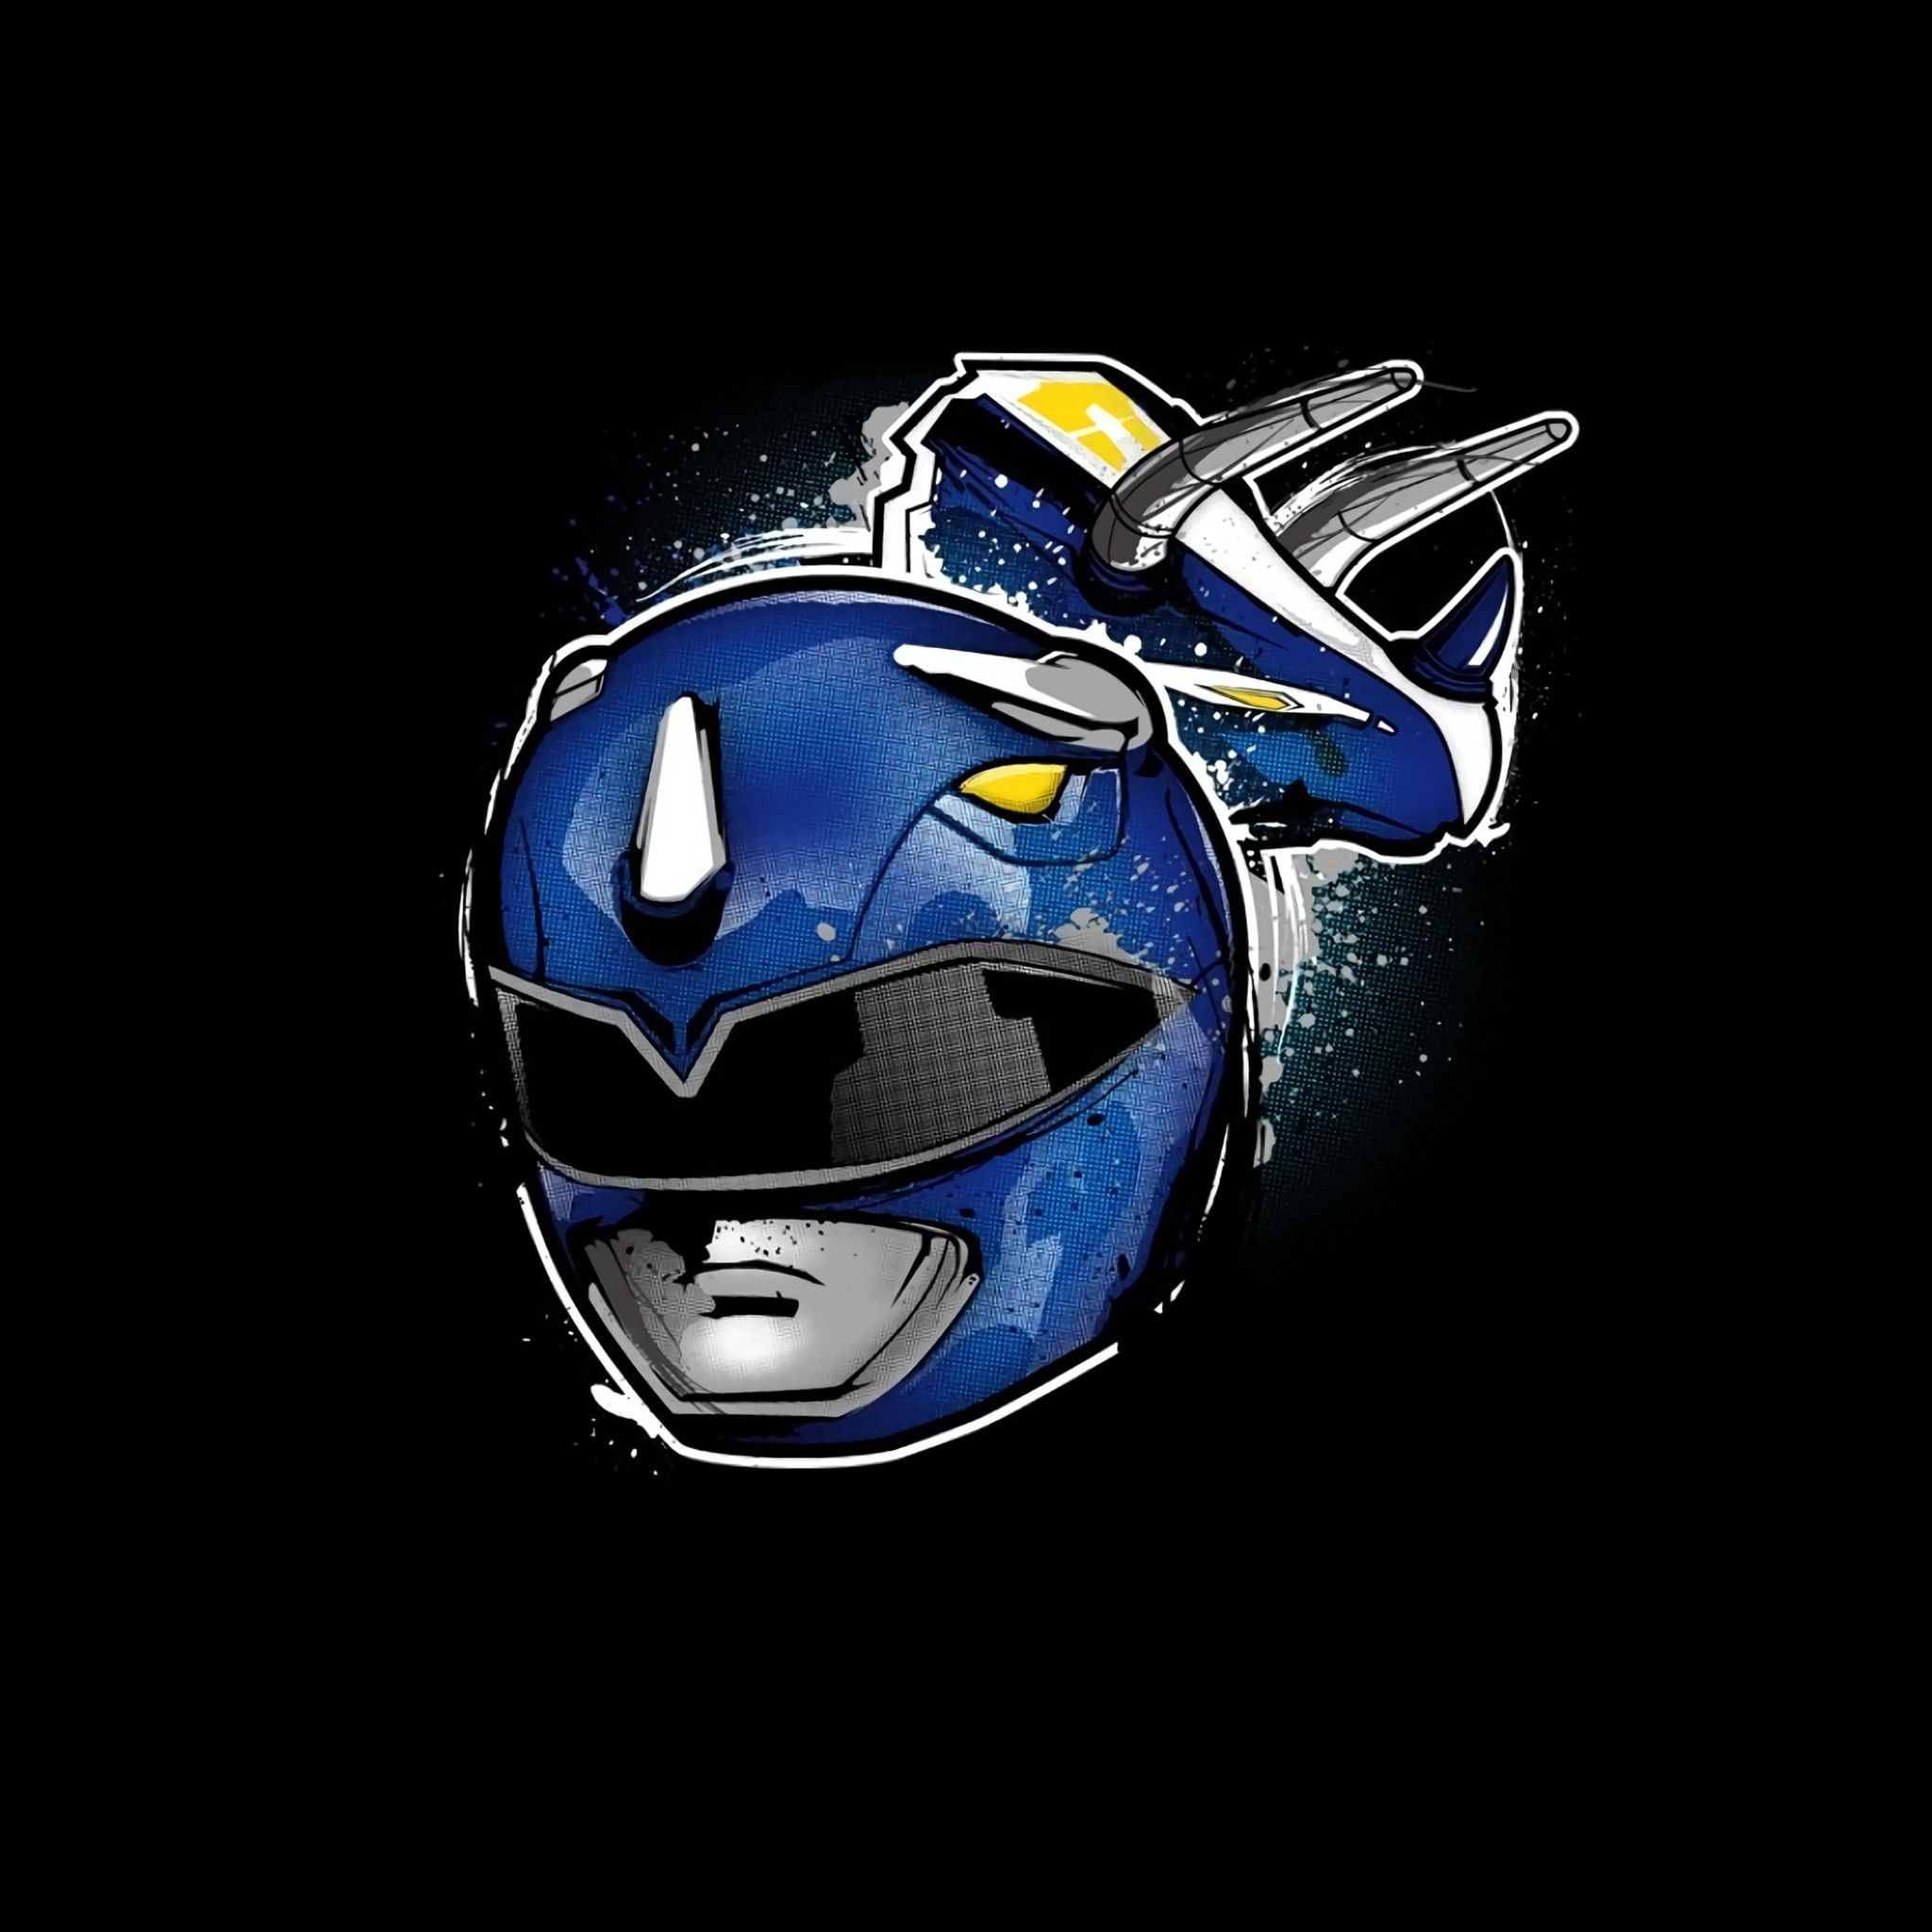 2048x2048 Blue Power ranger Tap to see more animated Power rangers wallpapers! @mobile9 | Power rangers, Ranger, Ipad mini wallpaper